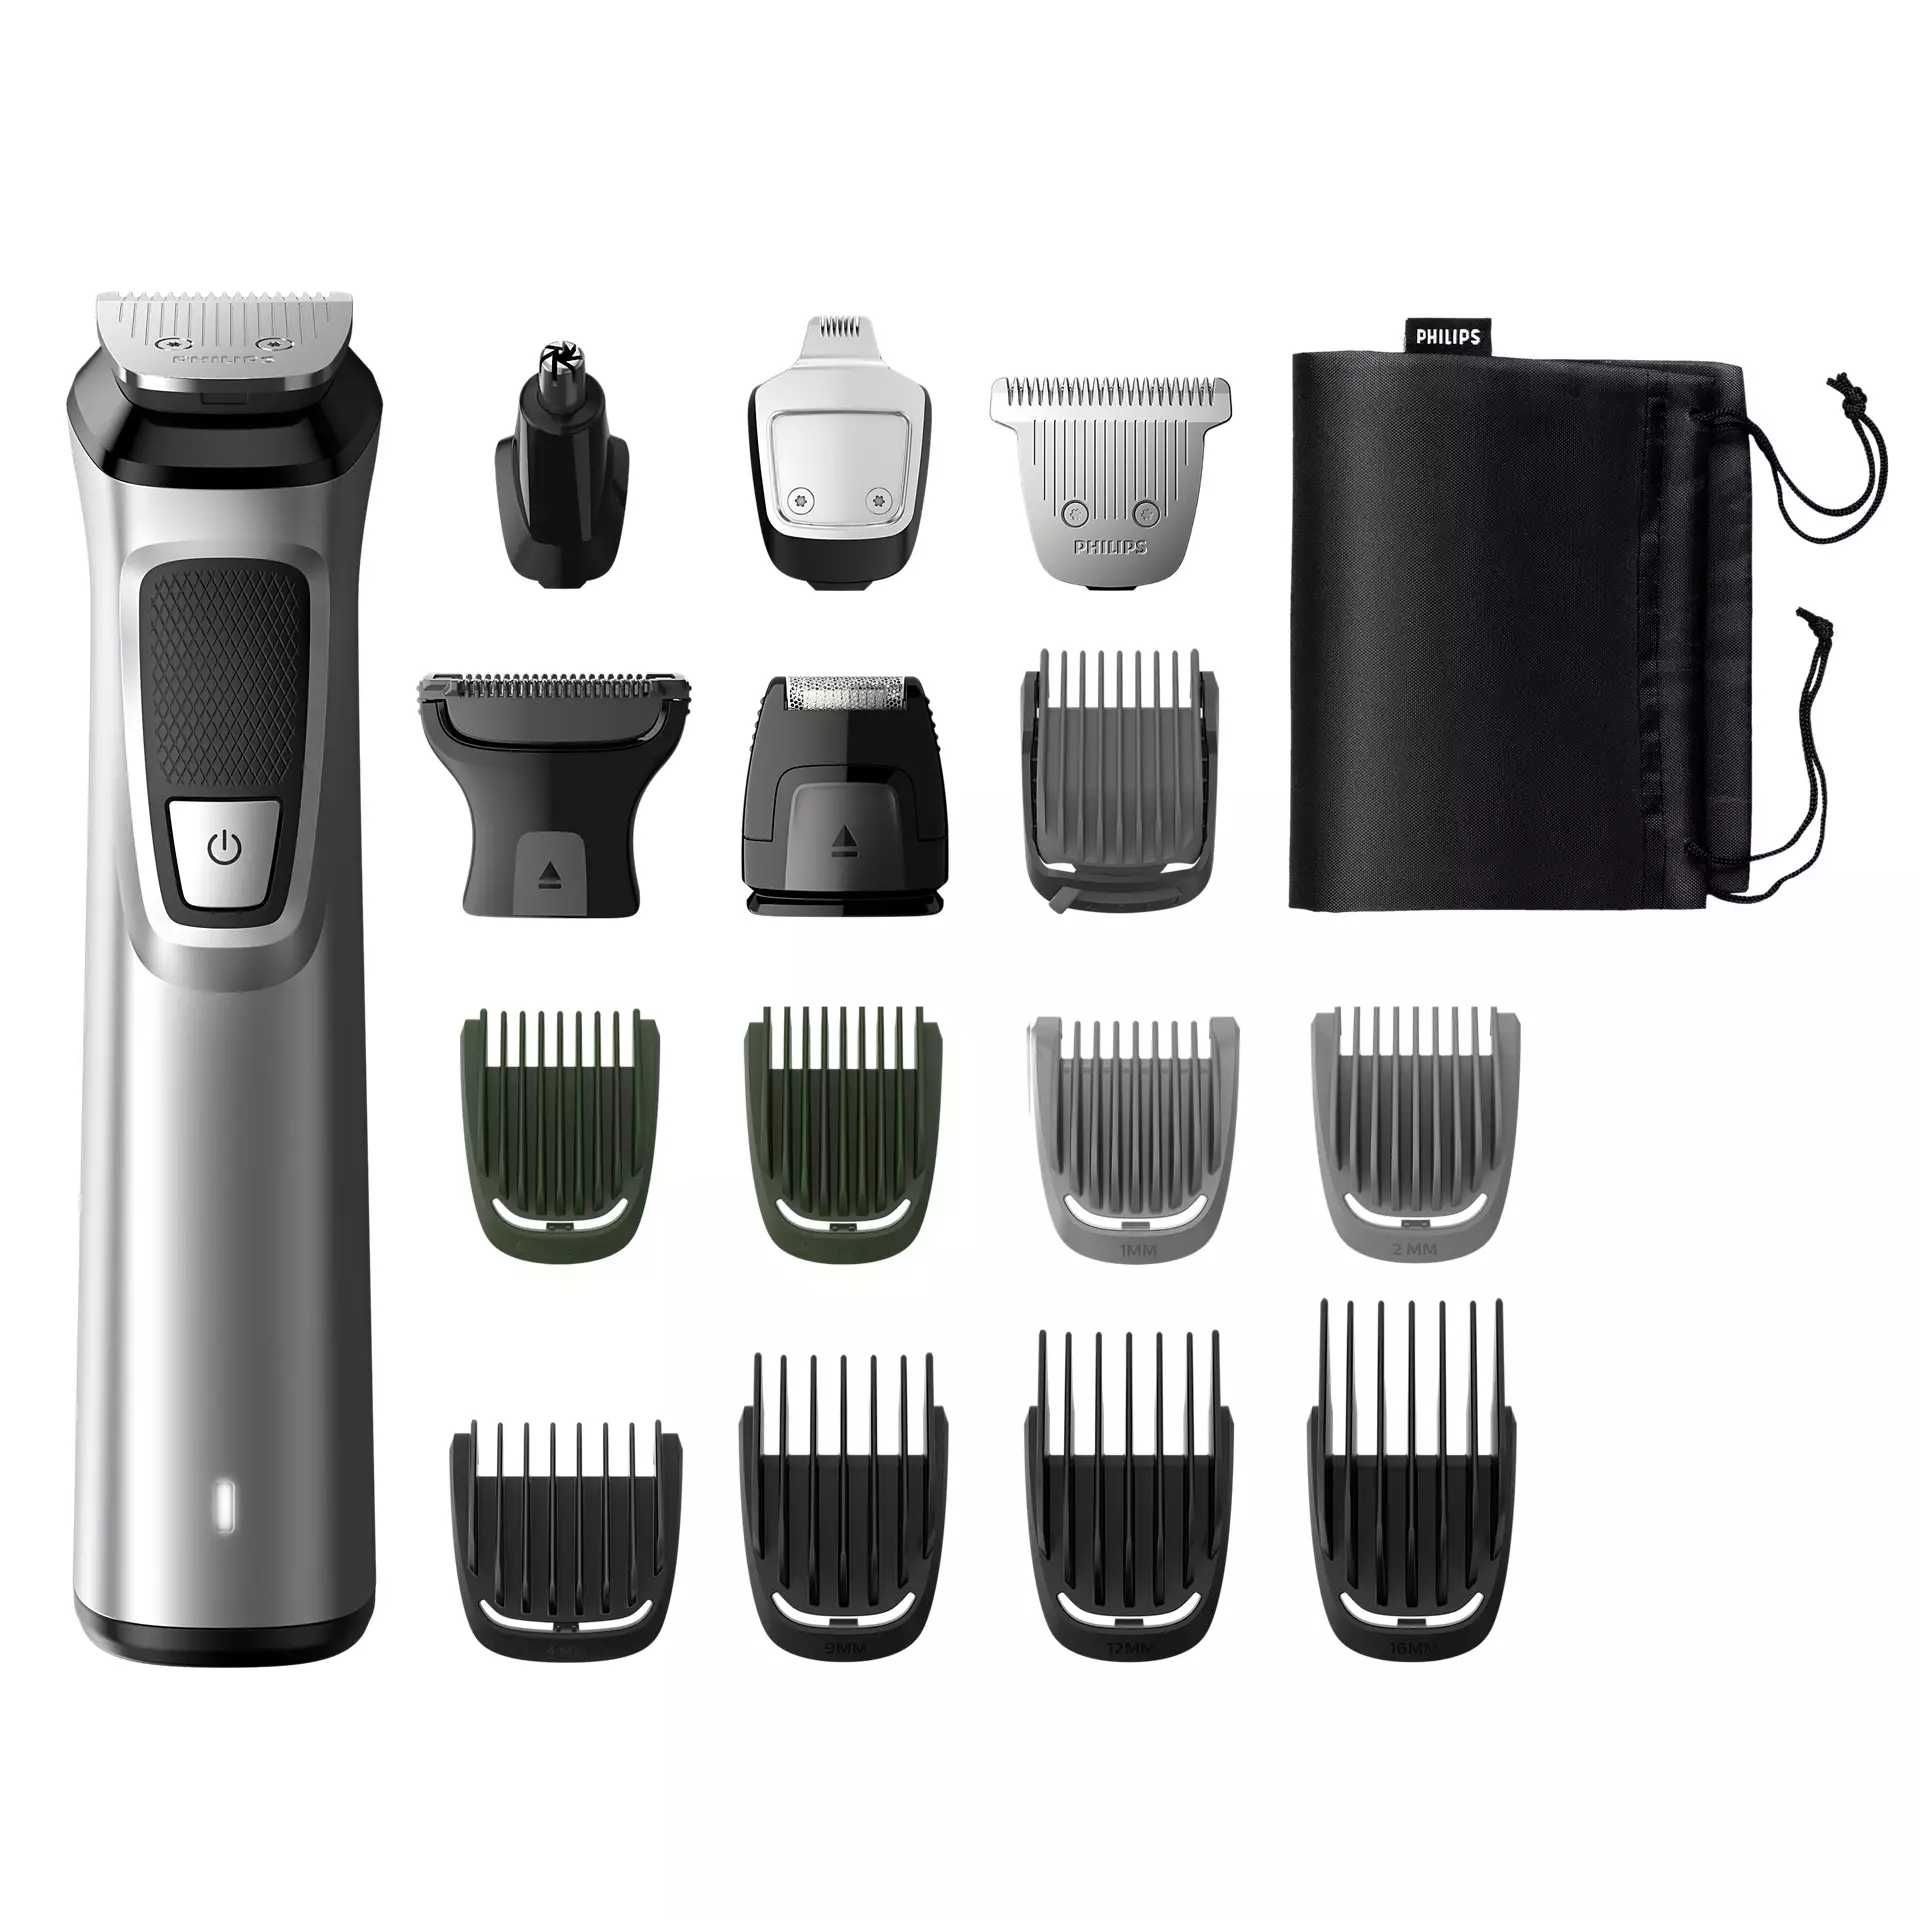 Trimmer, триммер, Philips, Philips MG7736, Philips trimmer